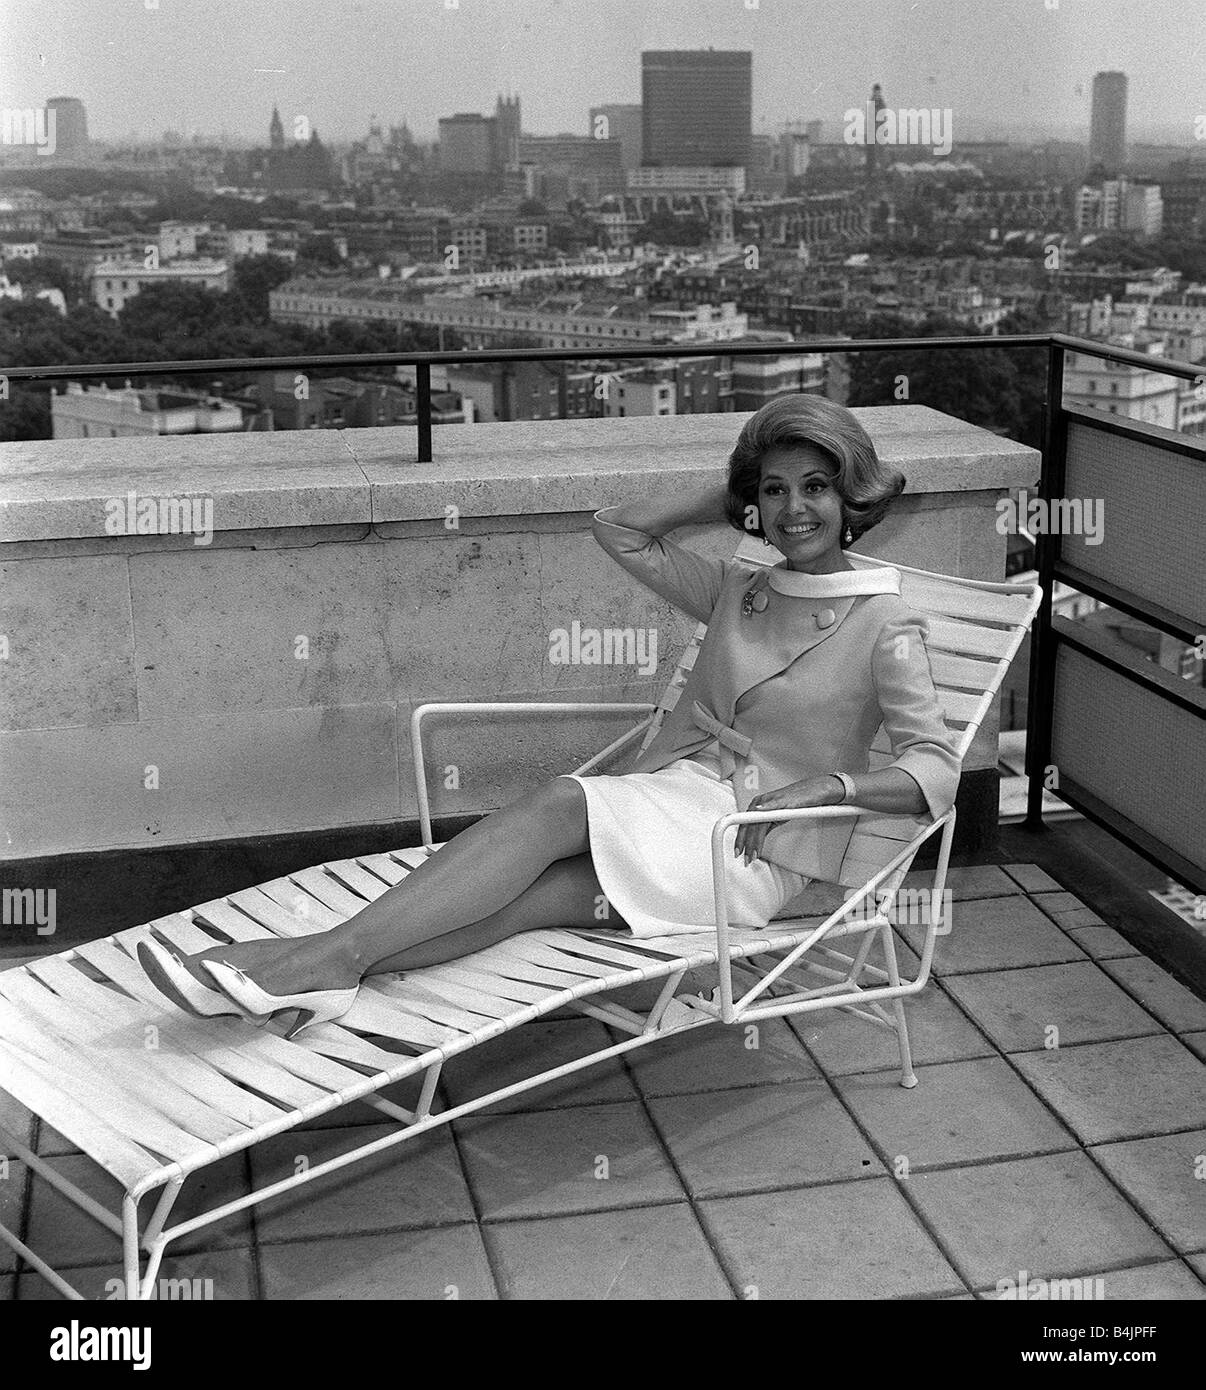 Actress singer dancer Cyd Charisse film star of the sixties arrived in London from Hollywood on her way to Marroco where she will be making a film with Lesie Phillips Pictures taken at the Carlton Towers Hotel London Stock Photo